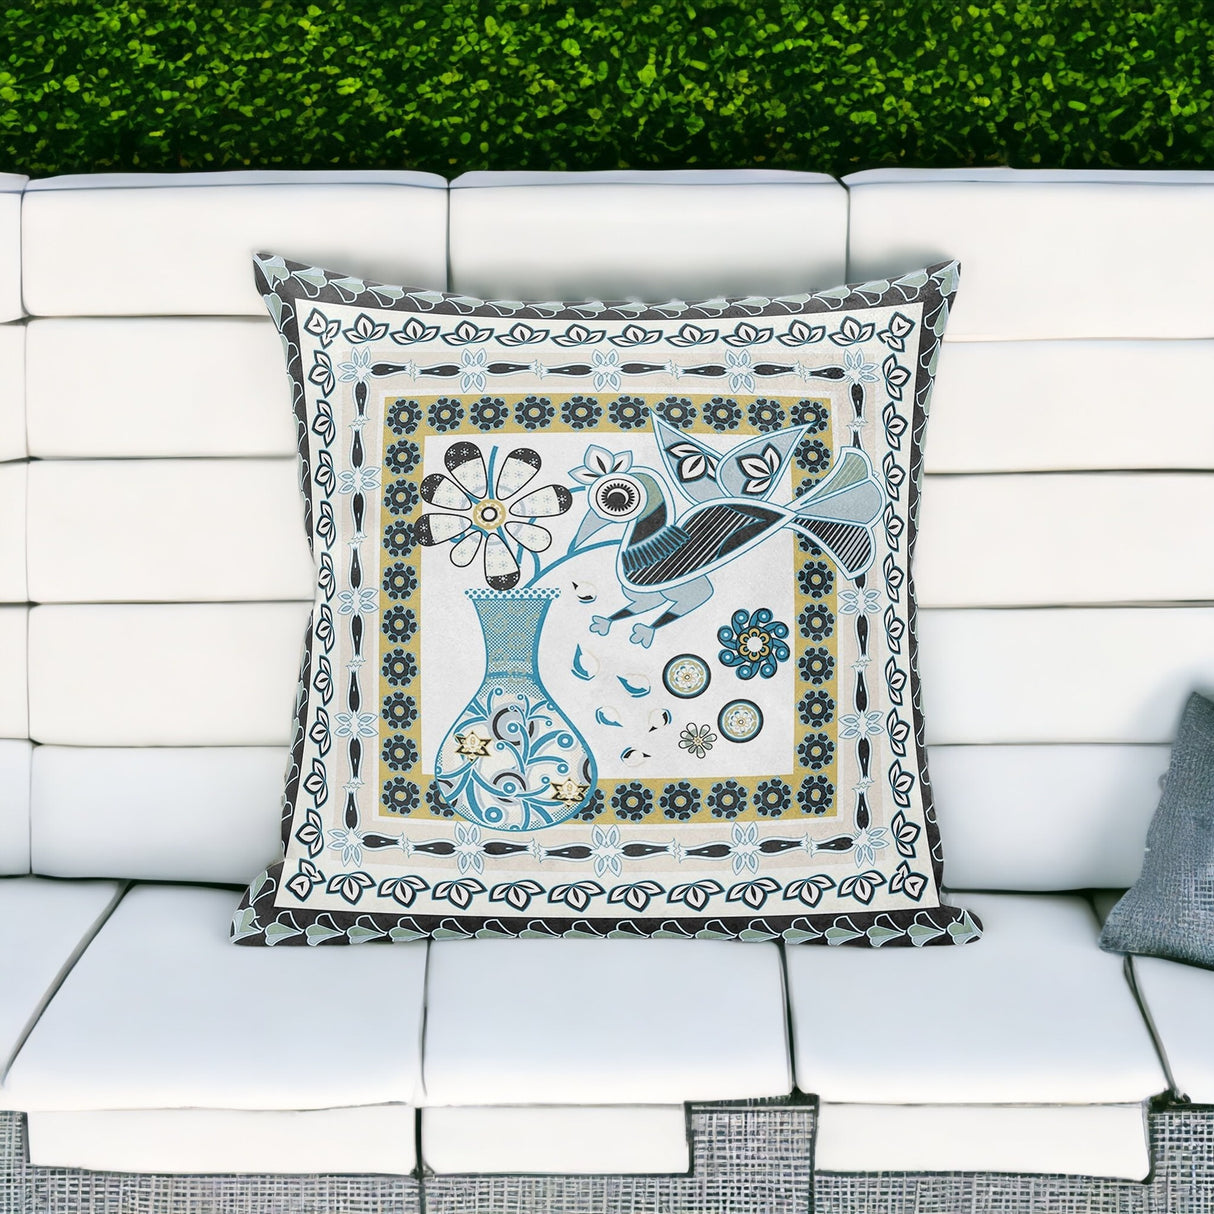 18" X 18" Blue and White Peacock Blown Seam Floral Indoor Outdoor Throw Pillow